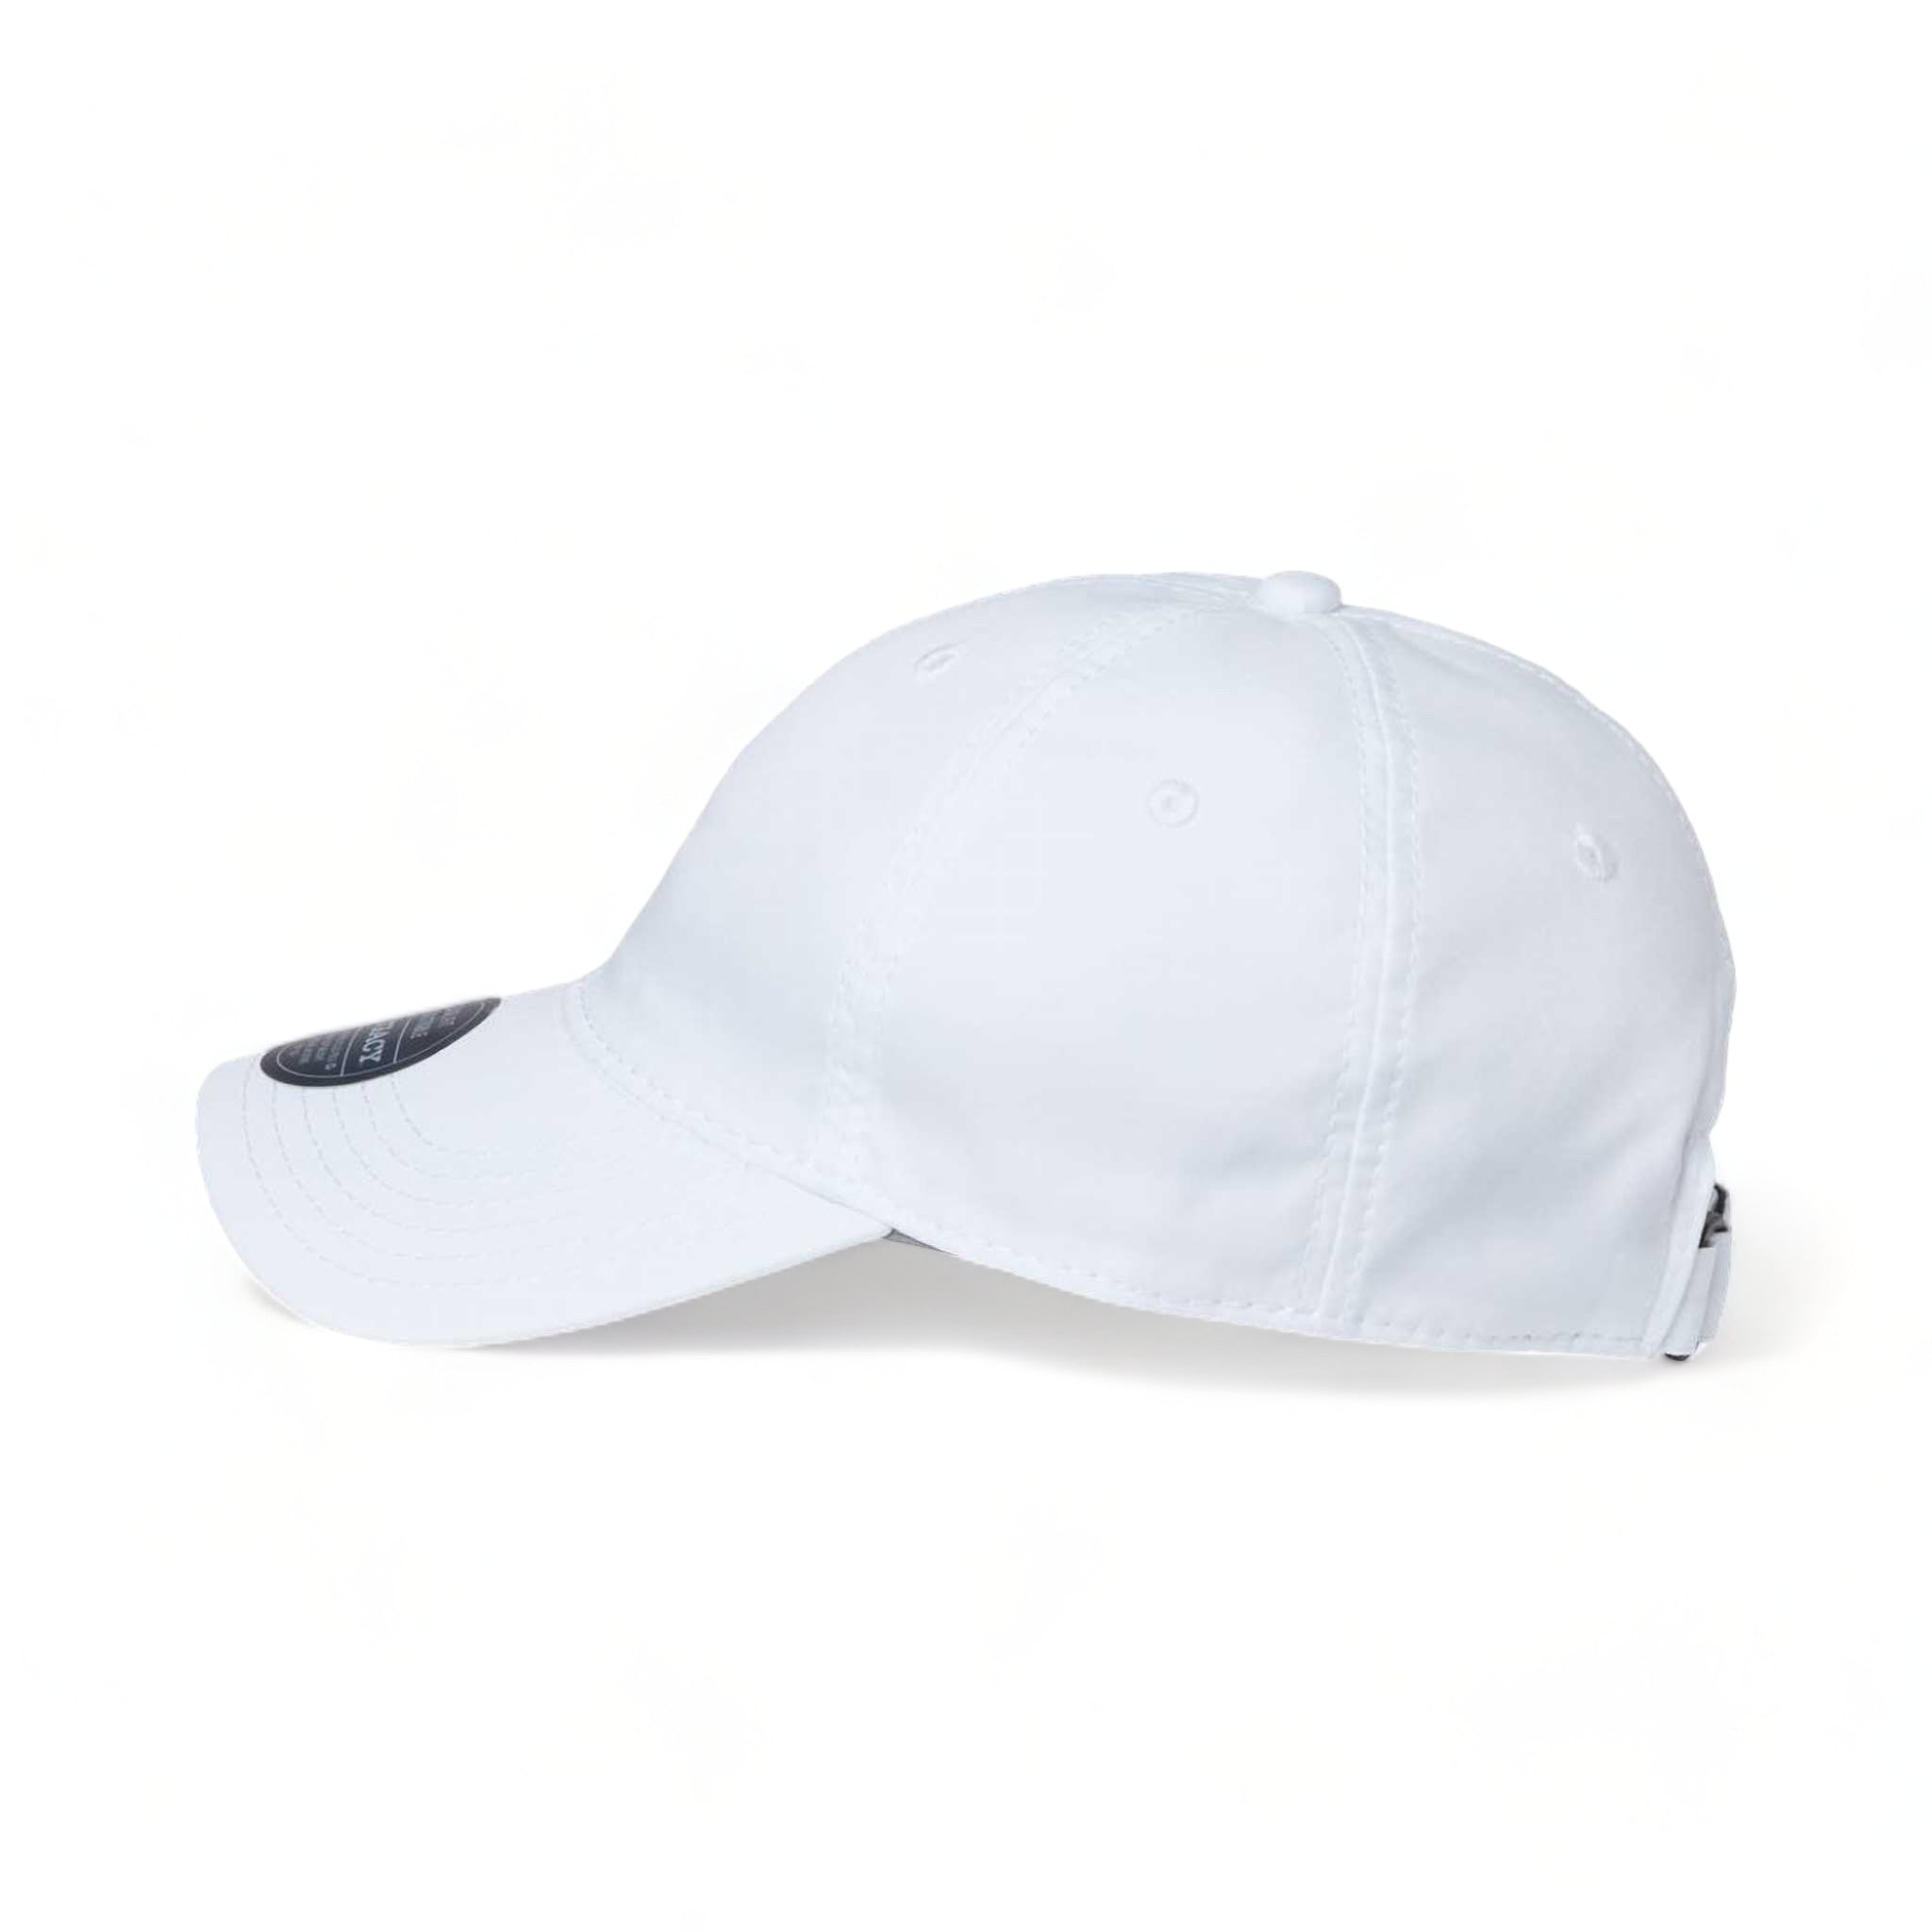 Side view of LEGACY CFA custom hat in white